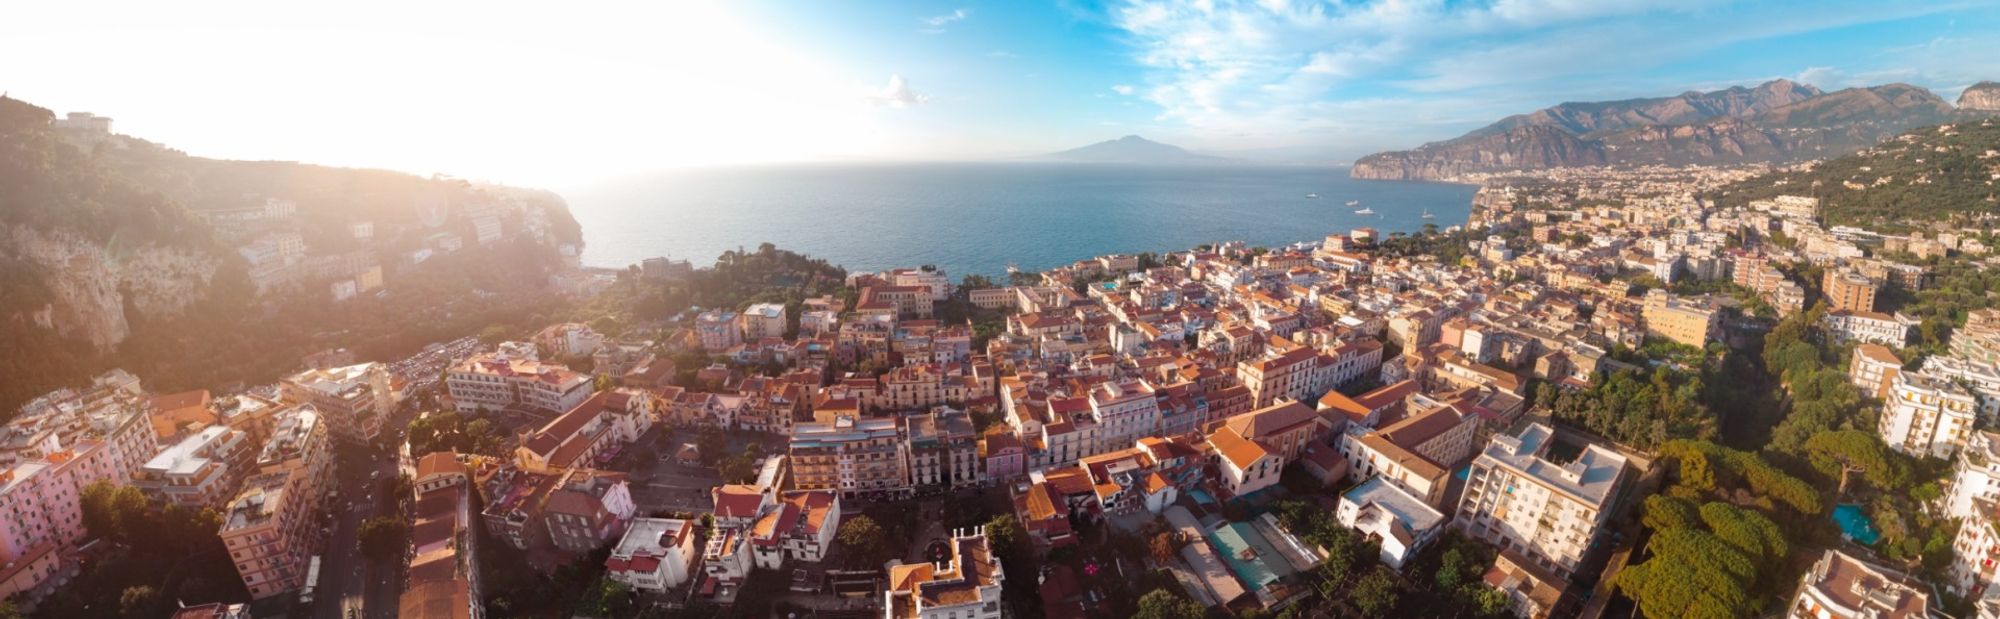 In the Heart of Sorrento